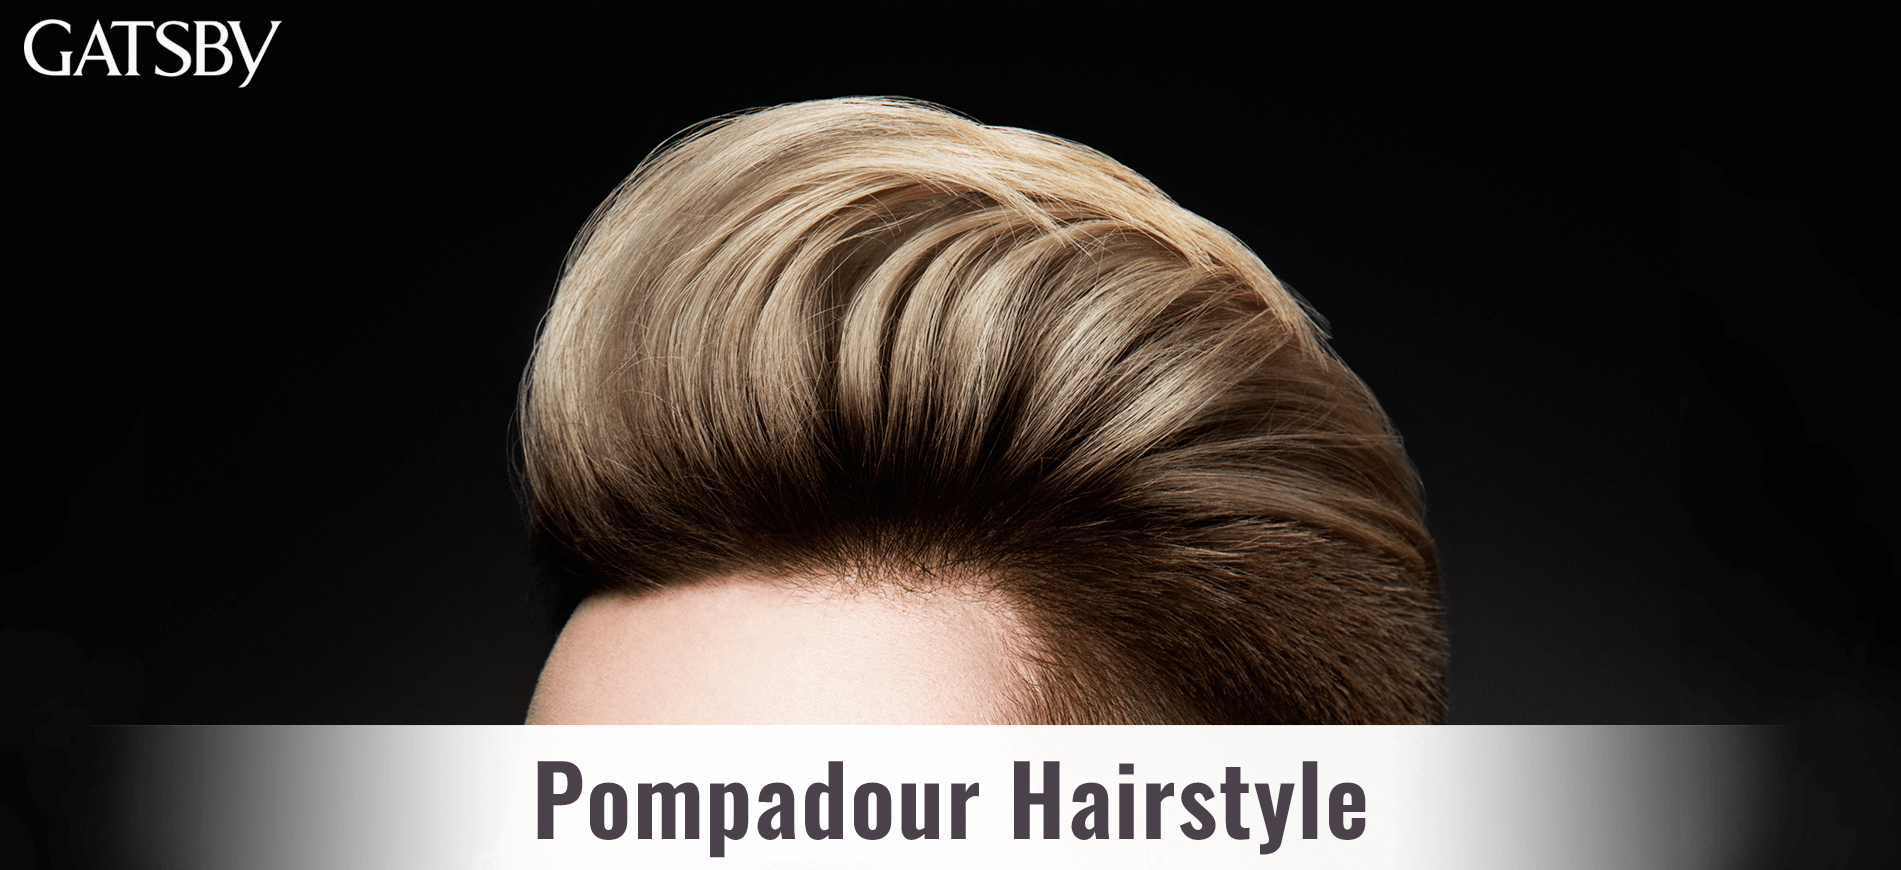 Pompadour Hairstyle With Full Beard and Curly Handlebar Moustache